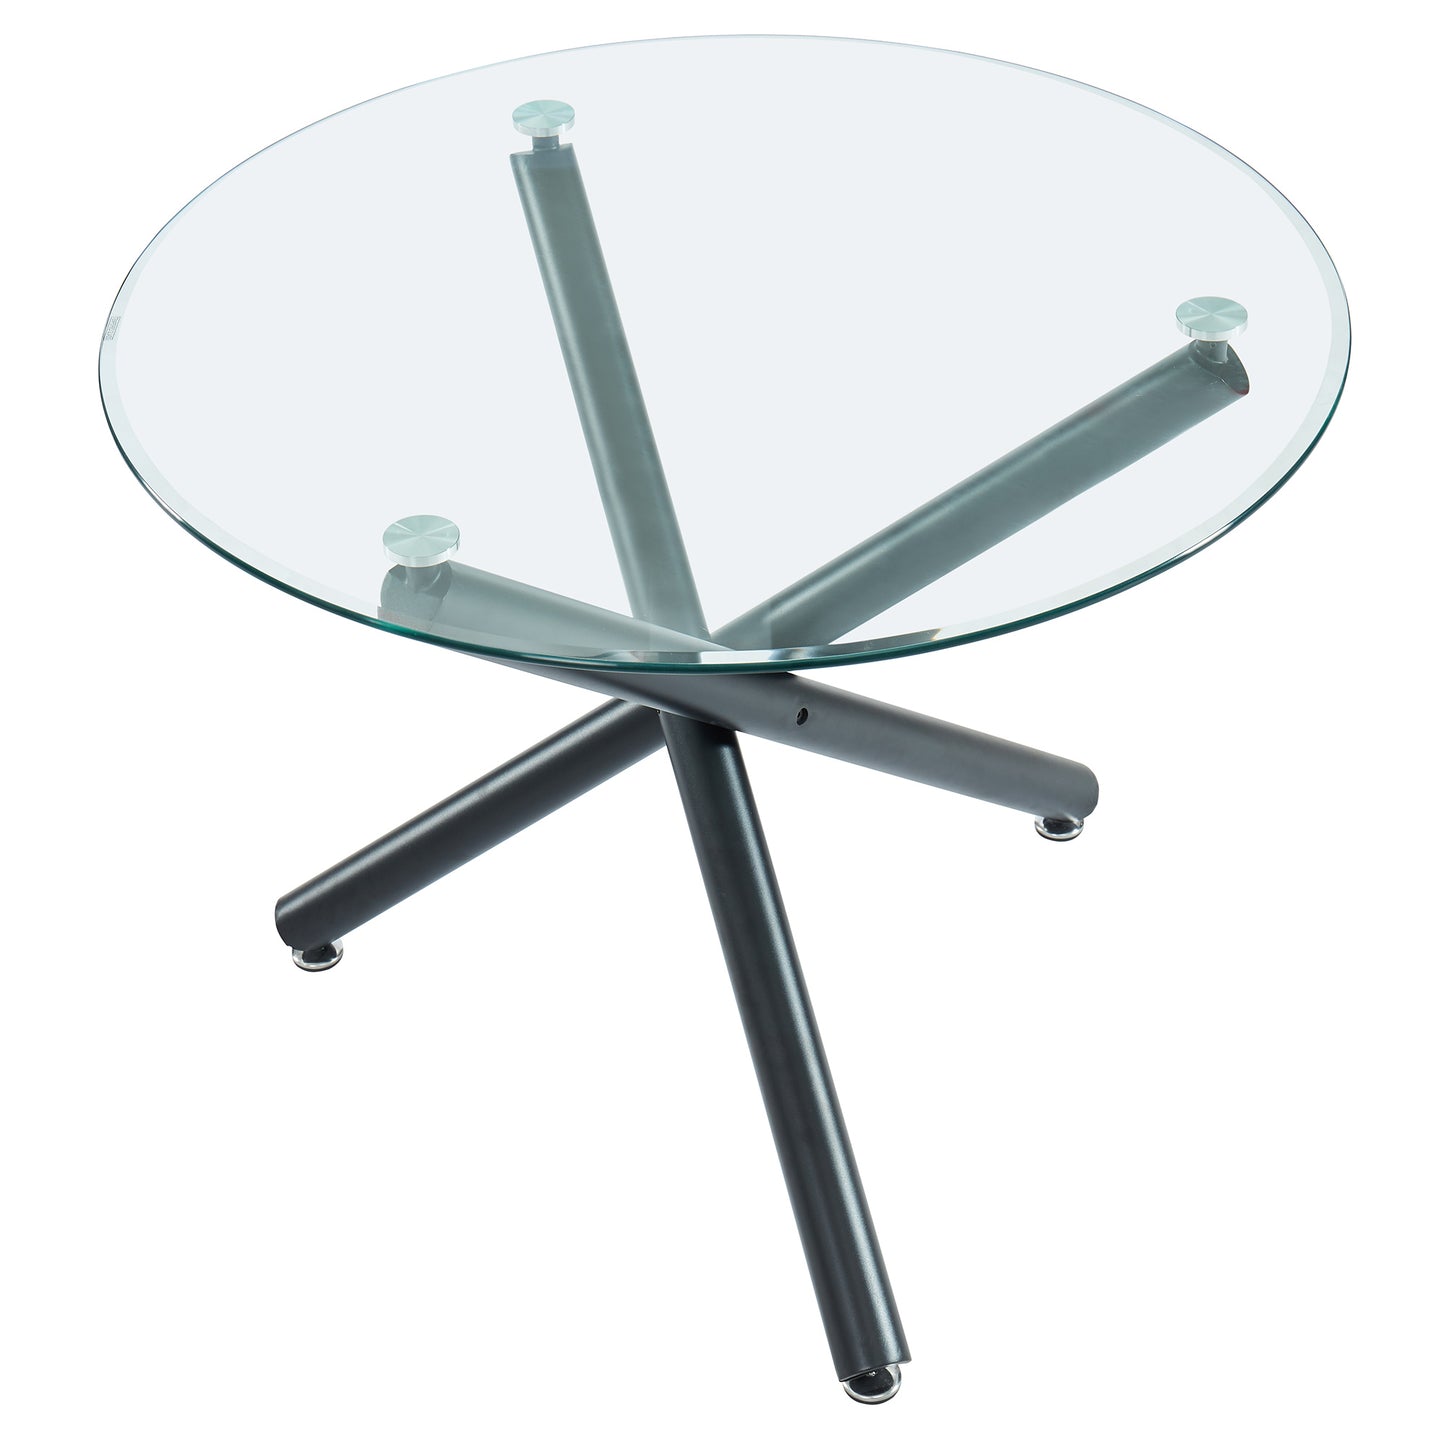 (SUZETTE- OLLY GREY- 5)- 39" ROUND- GLASS DINING TABLE- WITH 4 CHAIRS